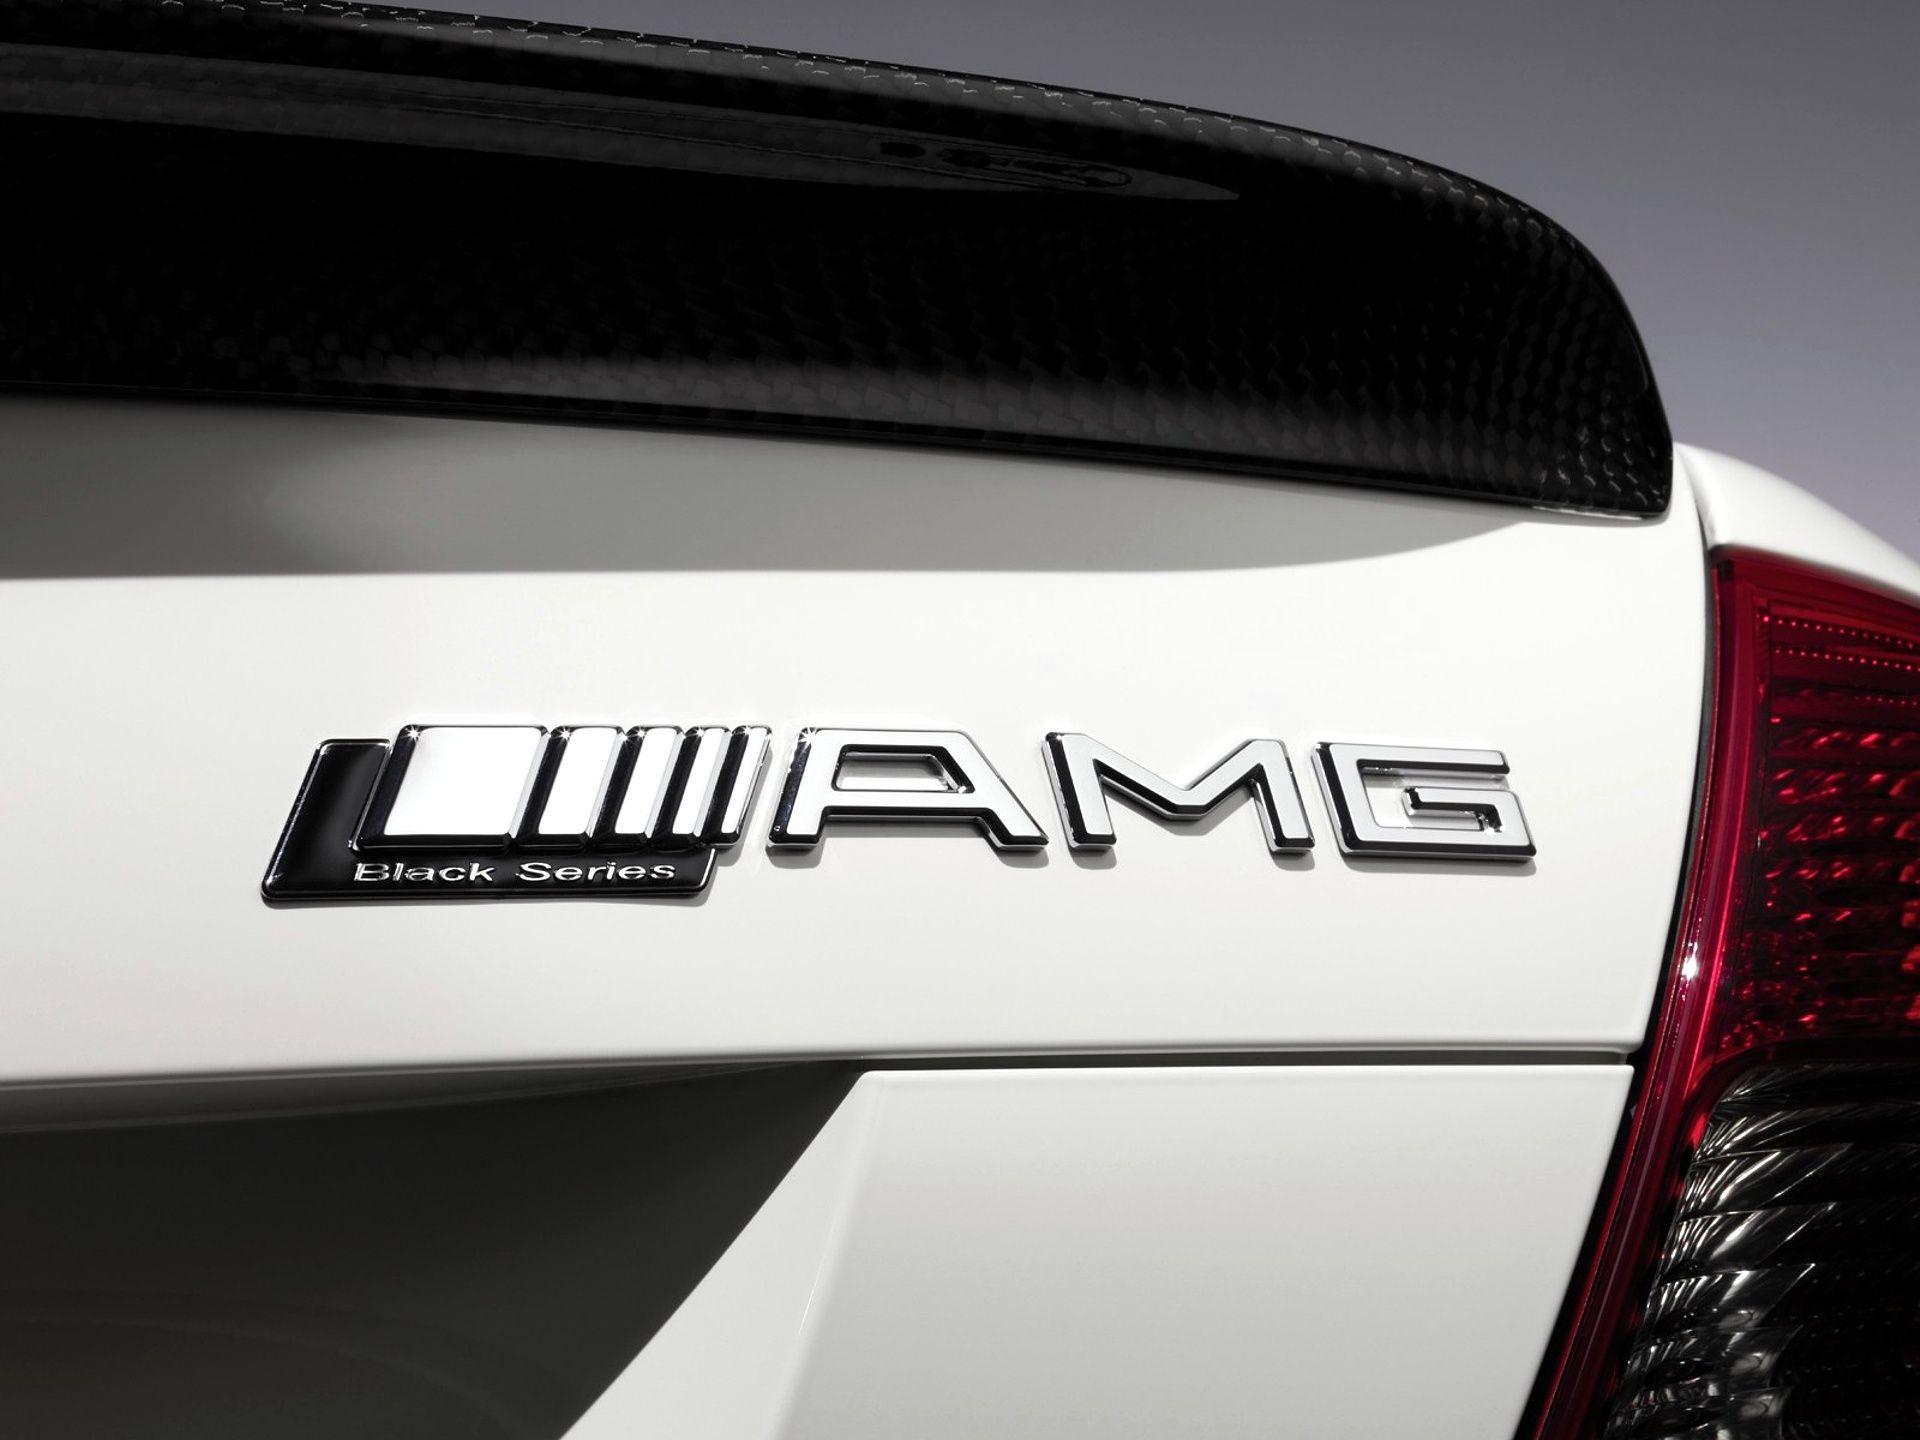 Mercedes AMG logo wallpapers from www.yours